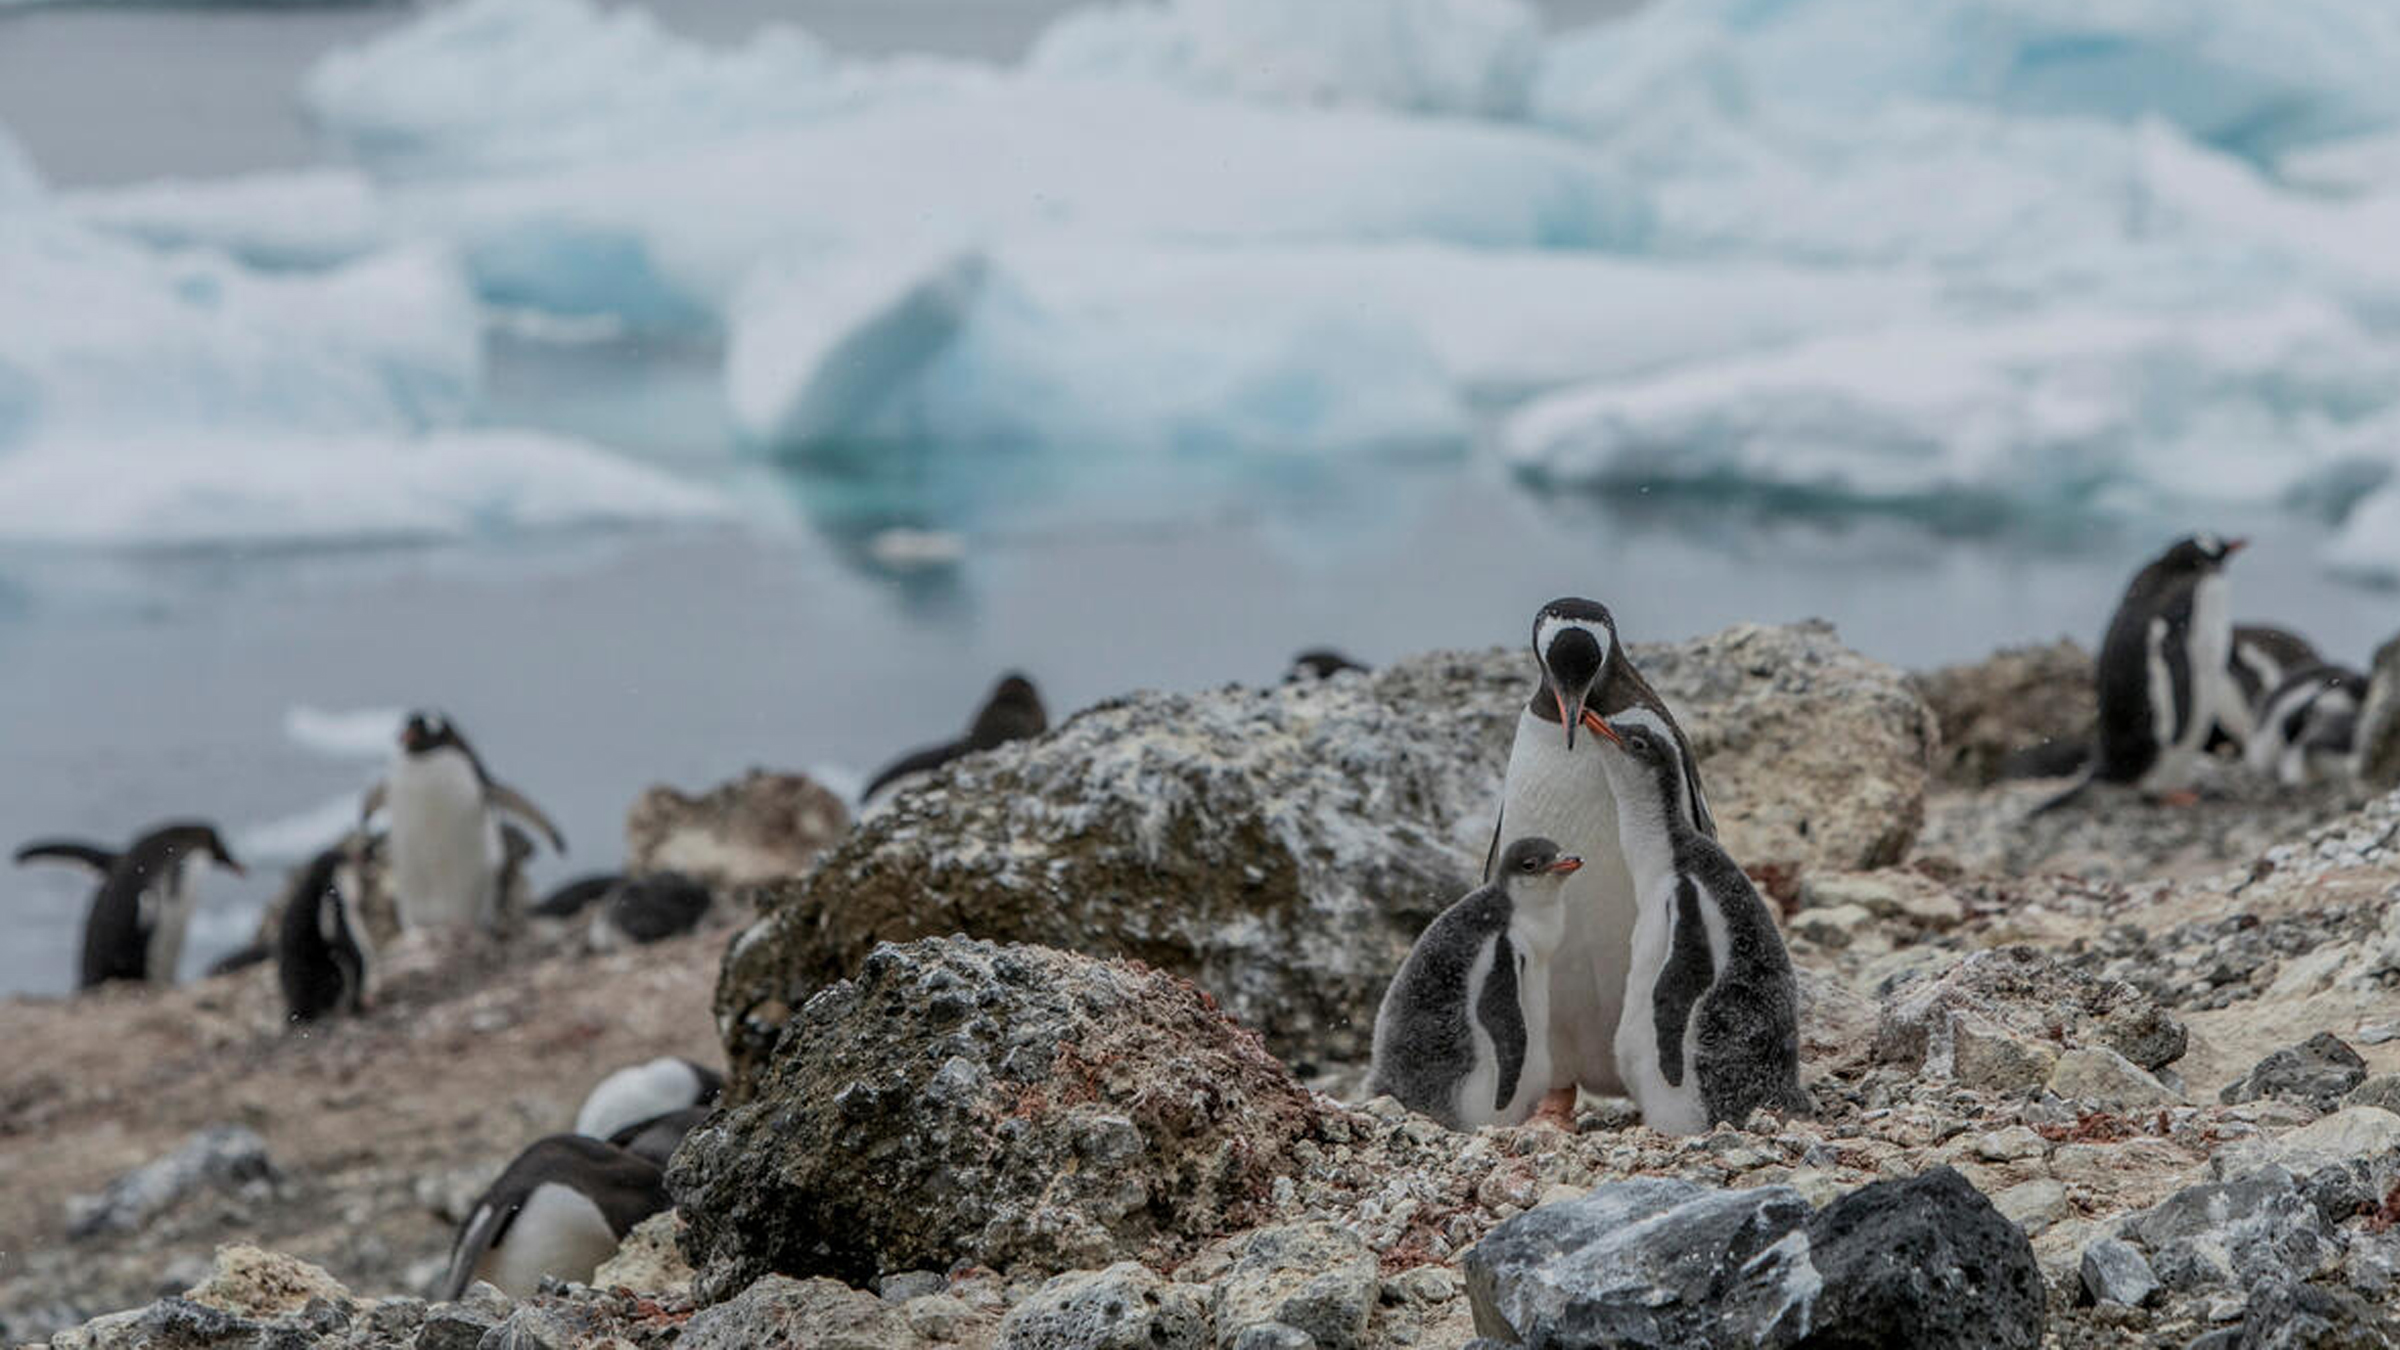 Here's why a new penguin colony in Antarctica is cause for concern